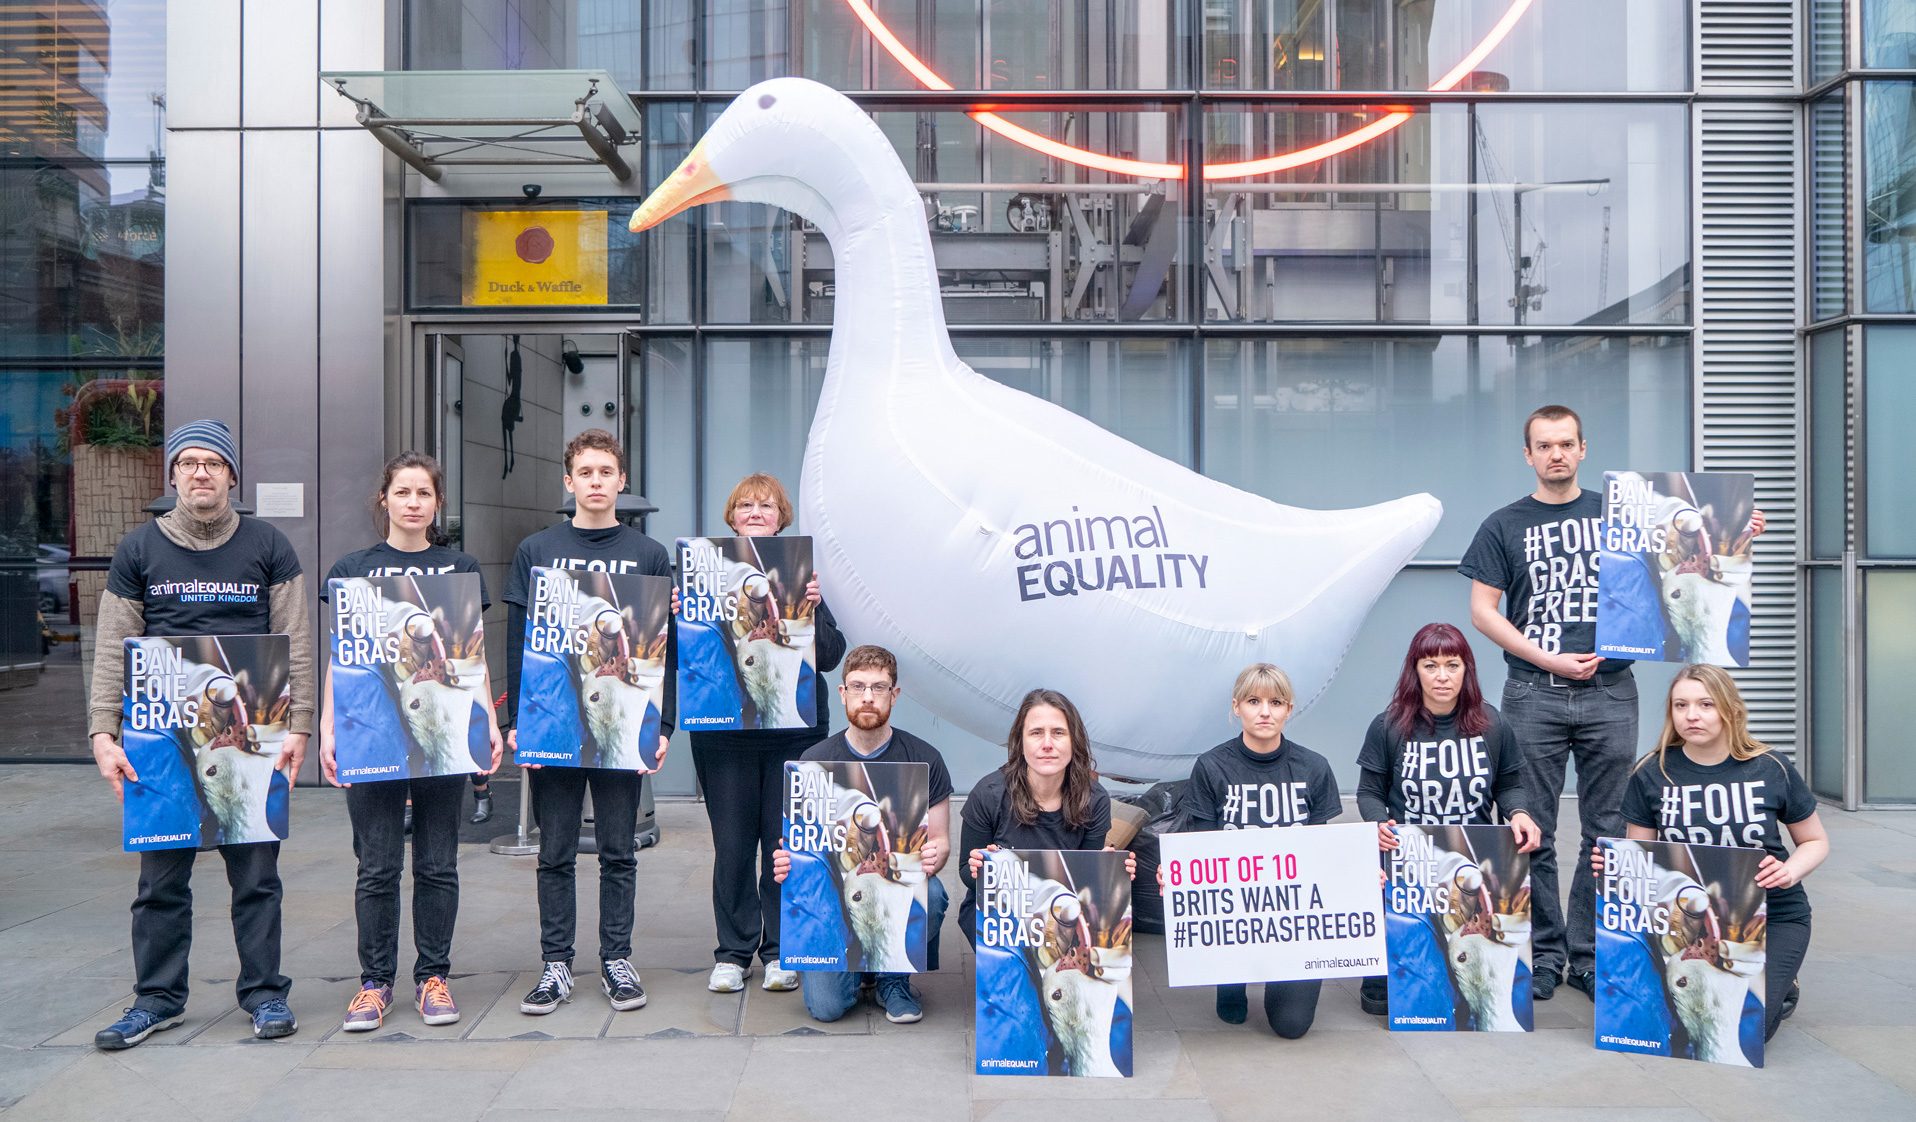 Foie Gras Day of Action - Animal Equality protests outside Duck & Waffle